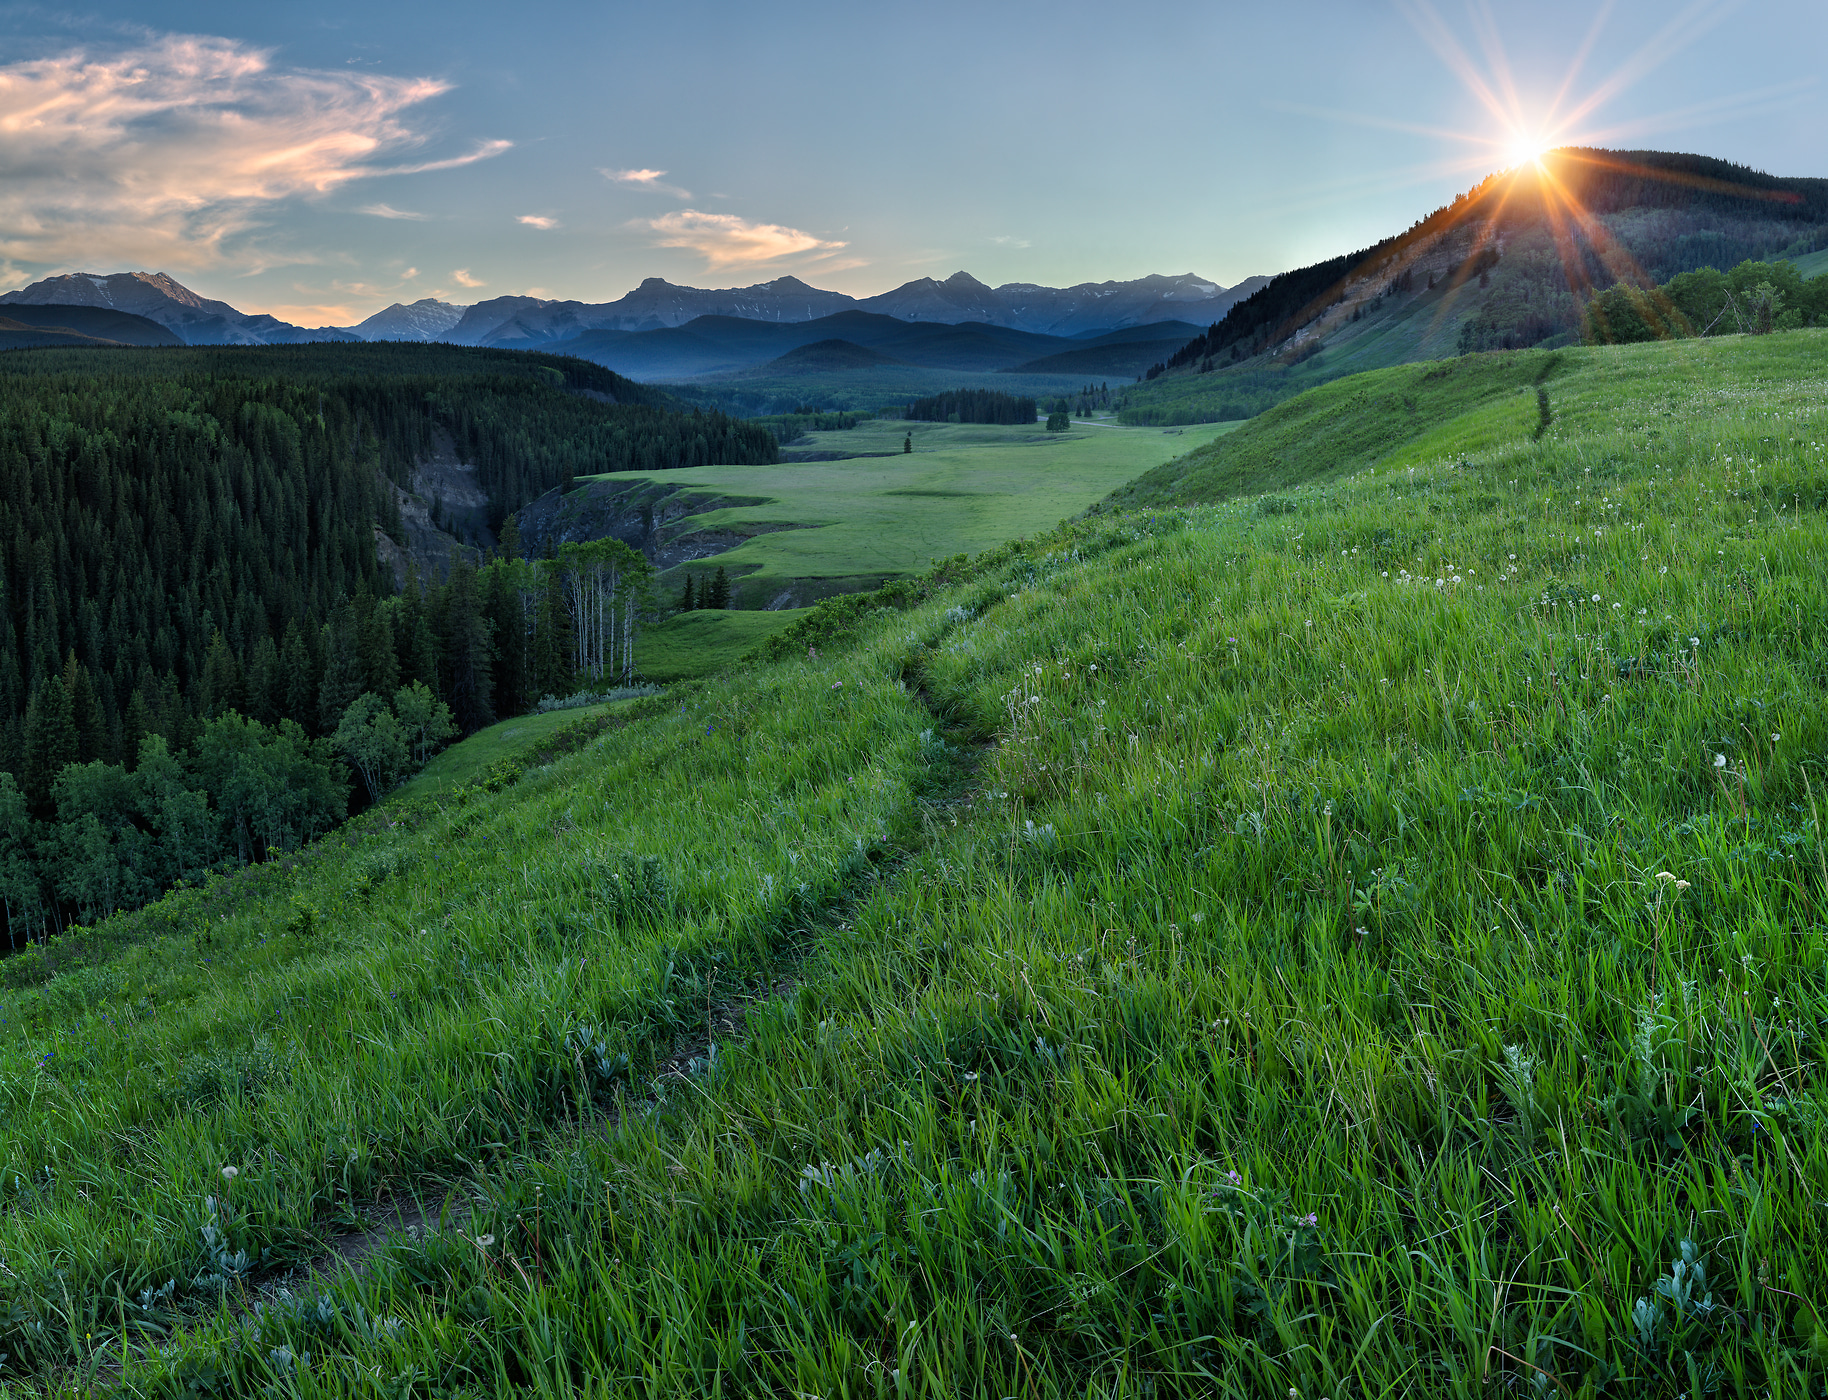 3,375 megapixels! A very high resolution, large VAST photo print of a trail in verdant hills and mountains at sunset; inspirational landscape photograph created by Scott Dimond in Bighorn Sheep Meadow, Kananaskis Country, Alberta Canada